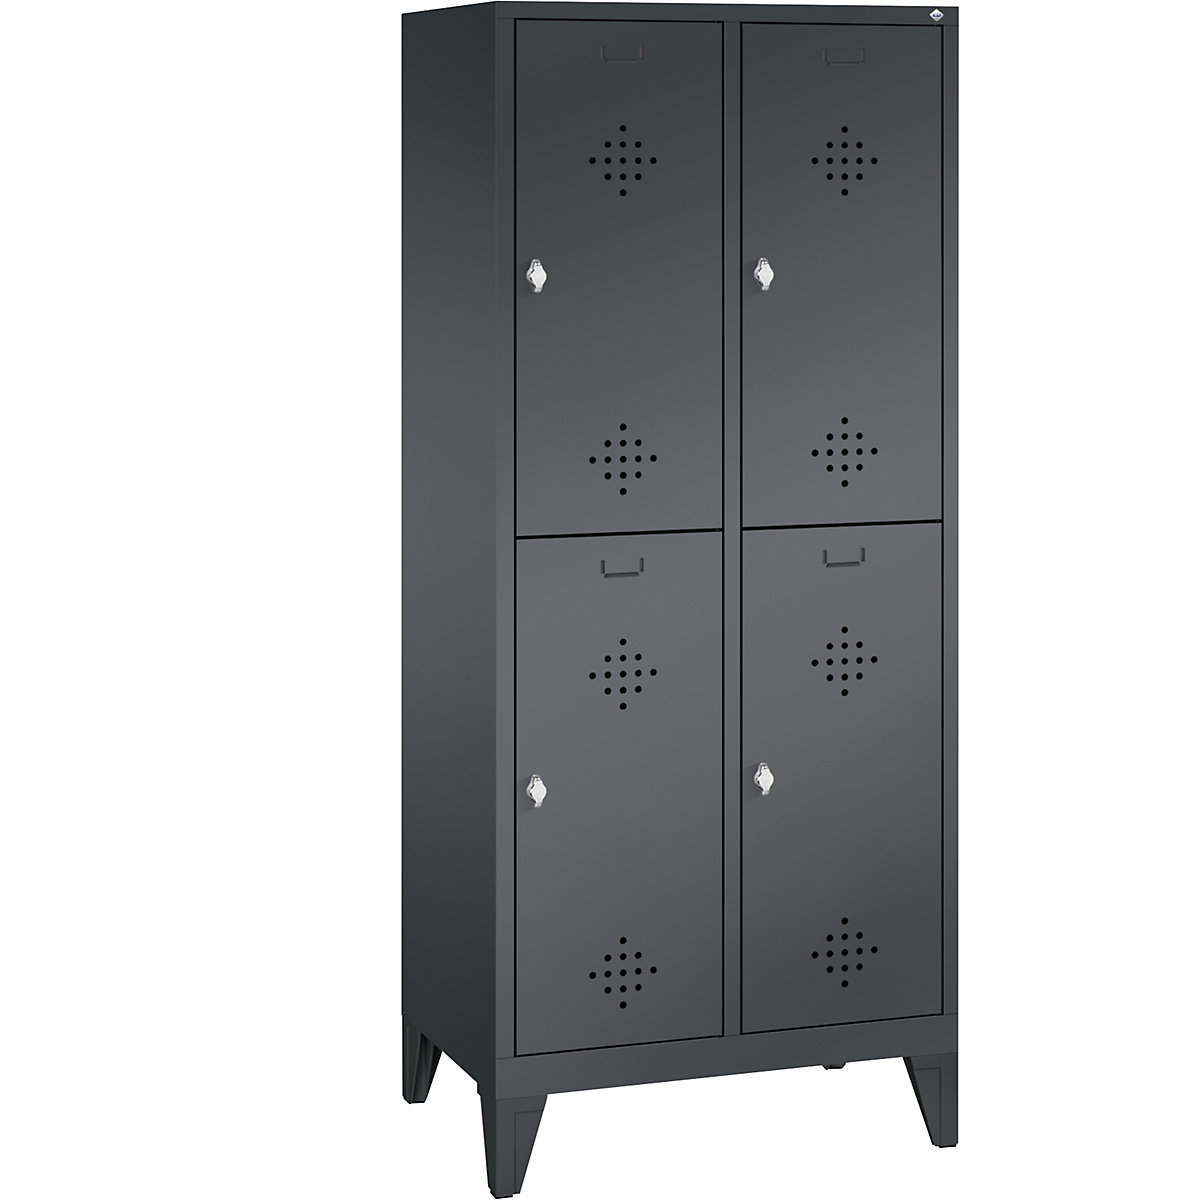 CLASSIC cloakroom locker with feet, double tier – C+P, 2 compartments, 2 shelf compartments each, compartment width 400 mm, black grey-9